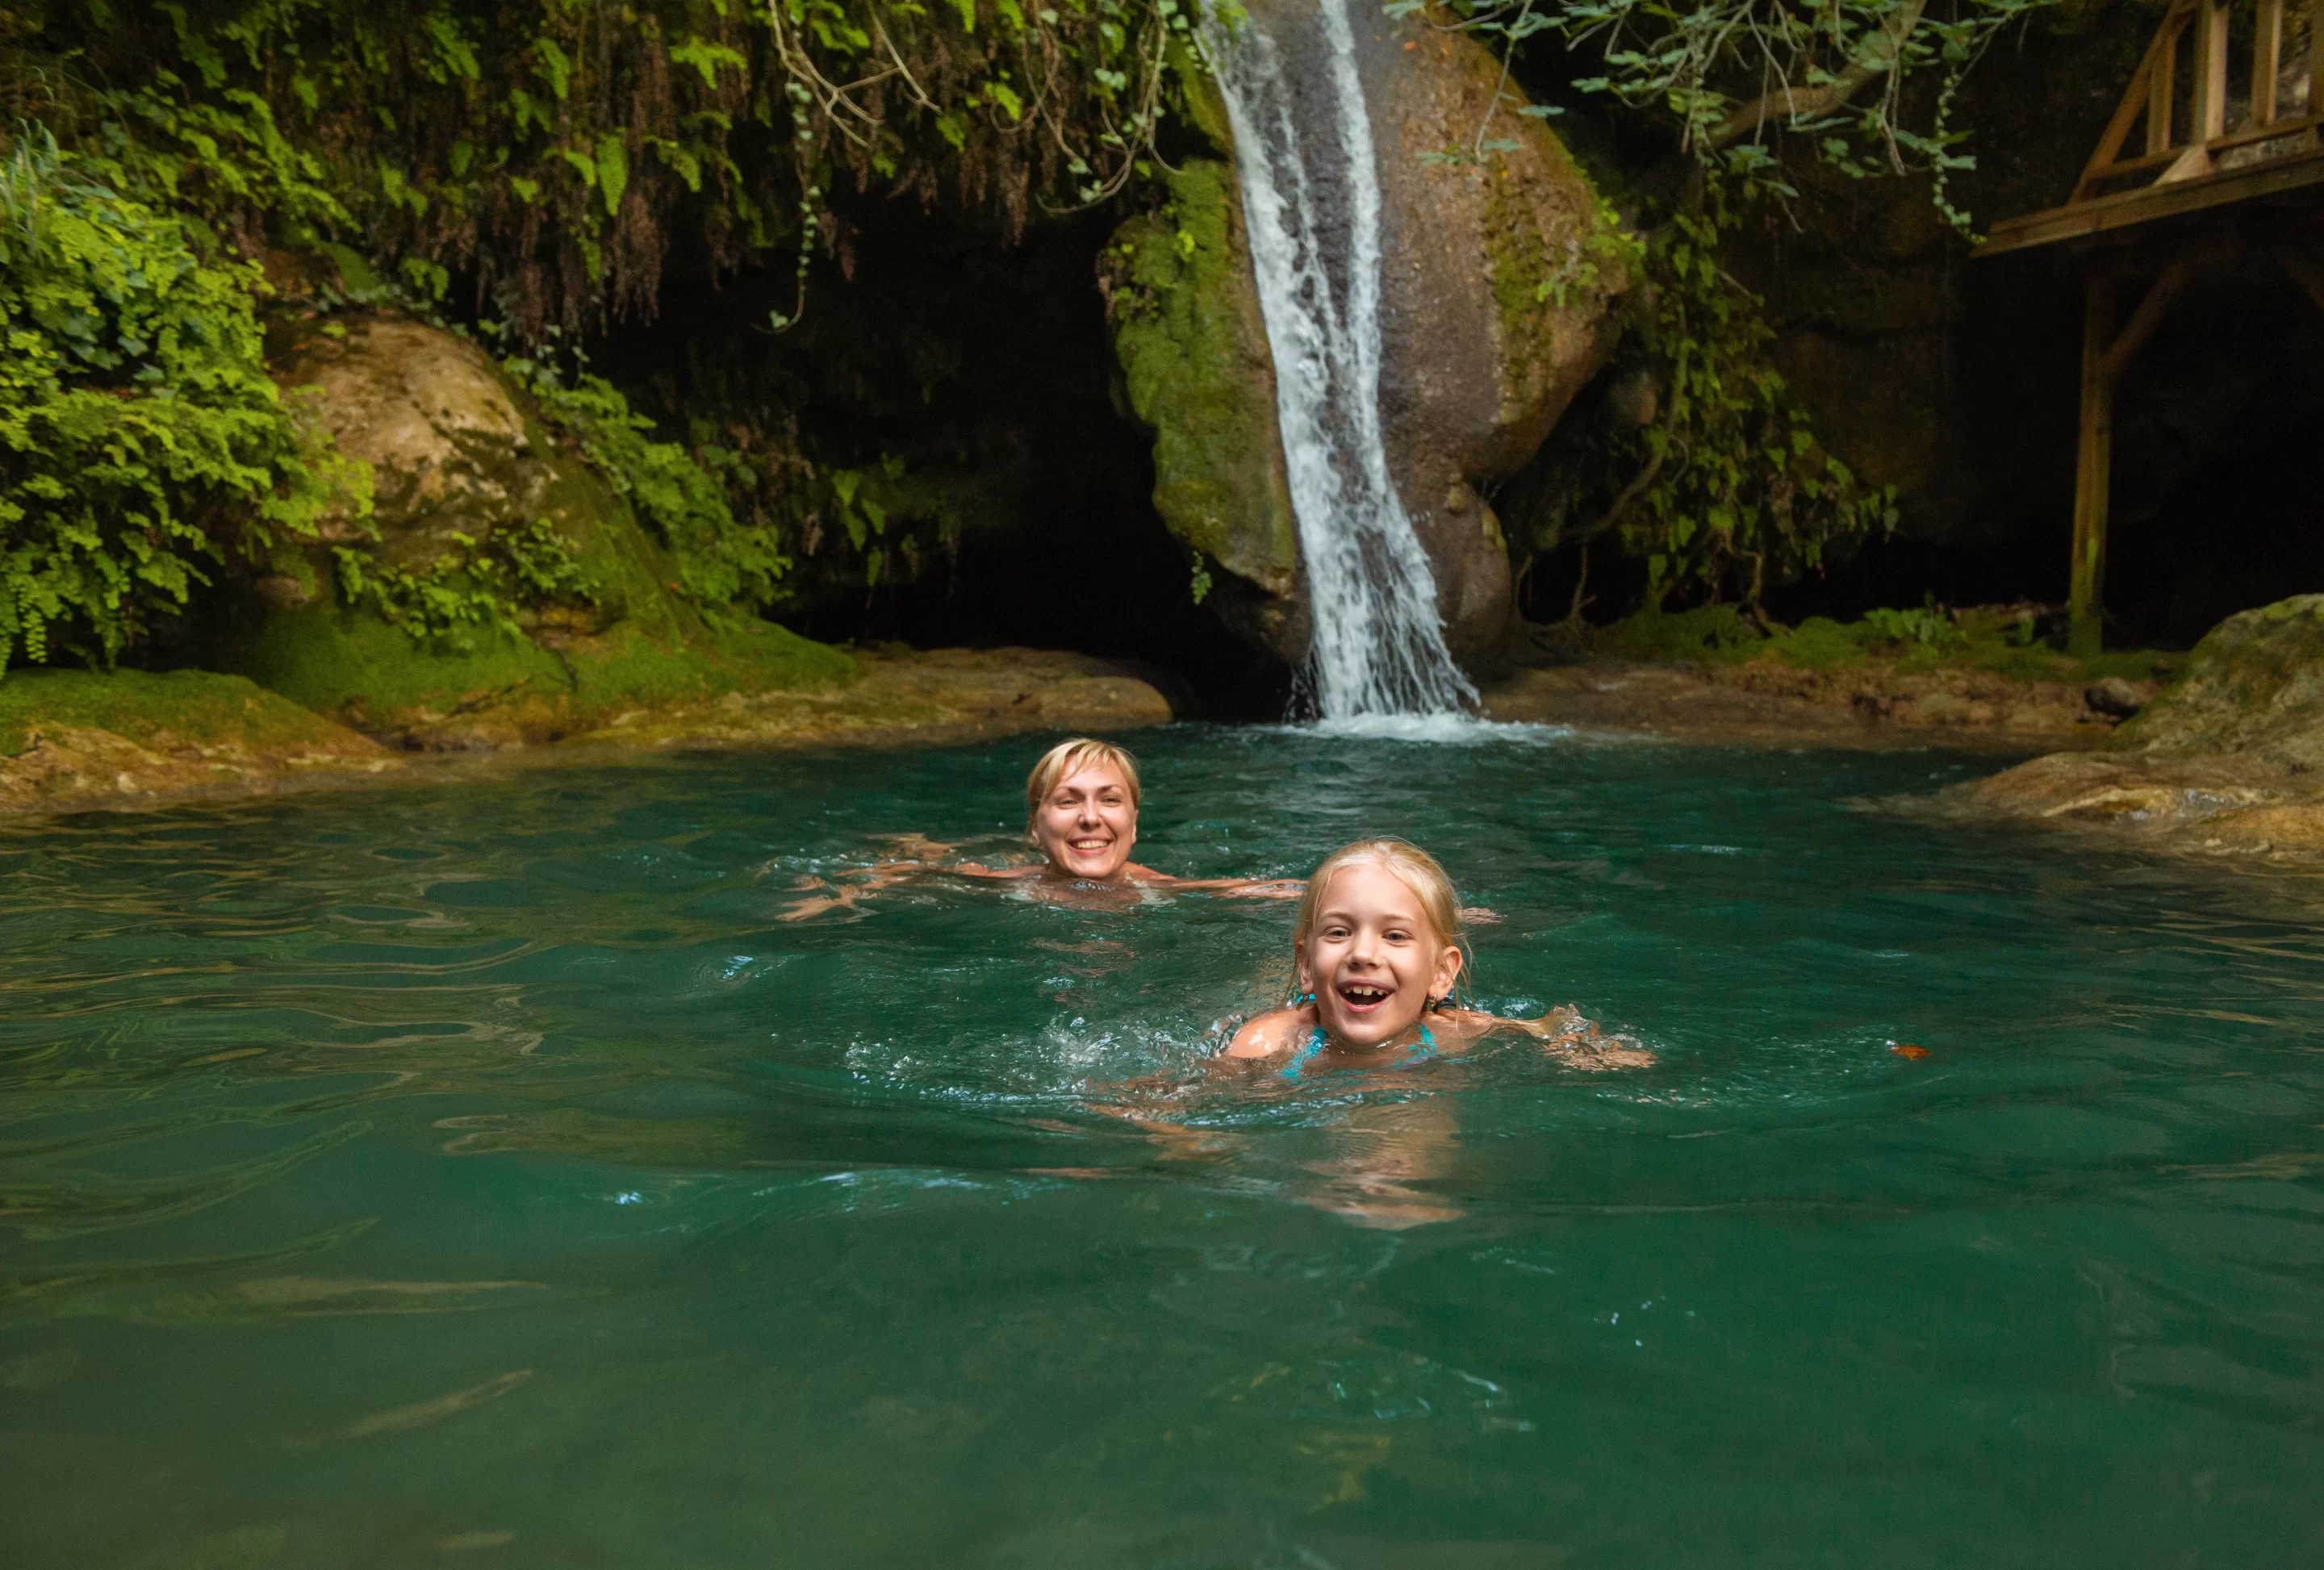 Visit Costa Rica and head to San José for a memorable time for you and your family!